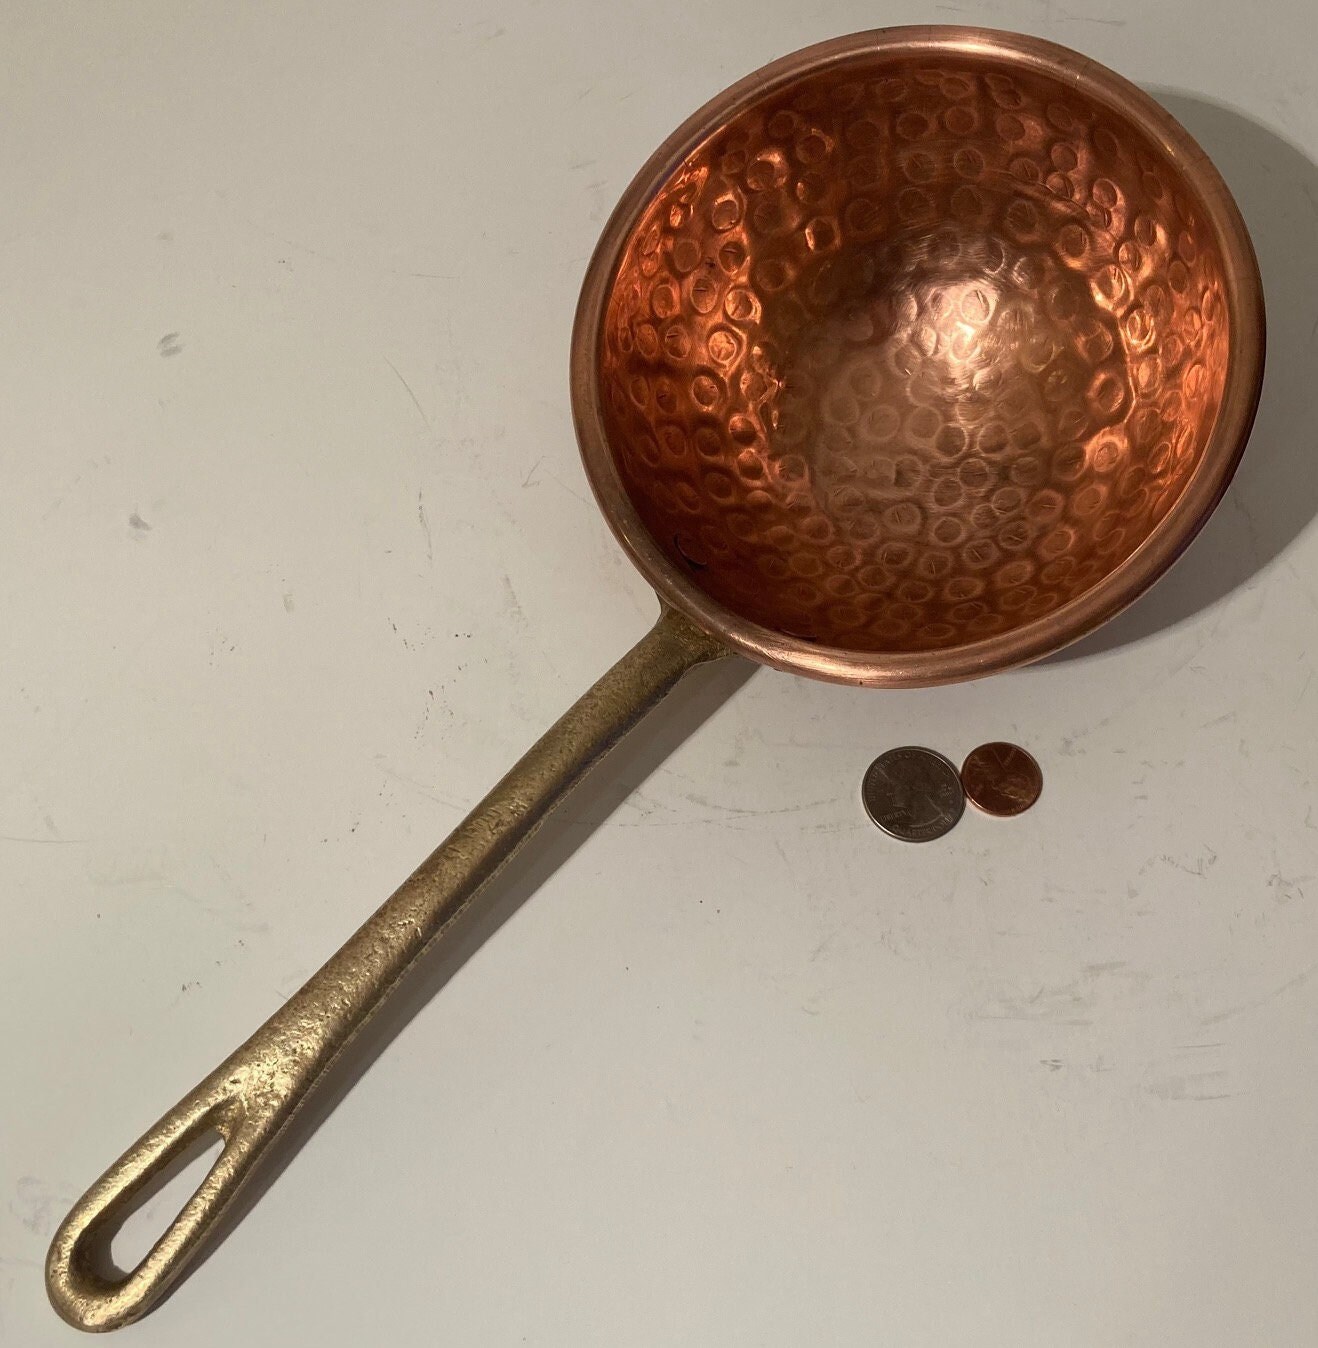 Copper Scoop with Brass Handle Rustic Kitchen Decor 12 Vintage Dipper Ladle with Large 6 by 4 Bowl